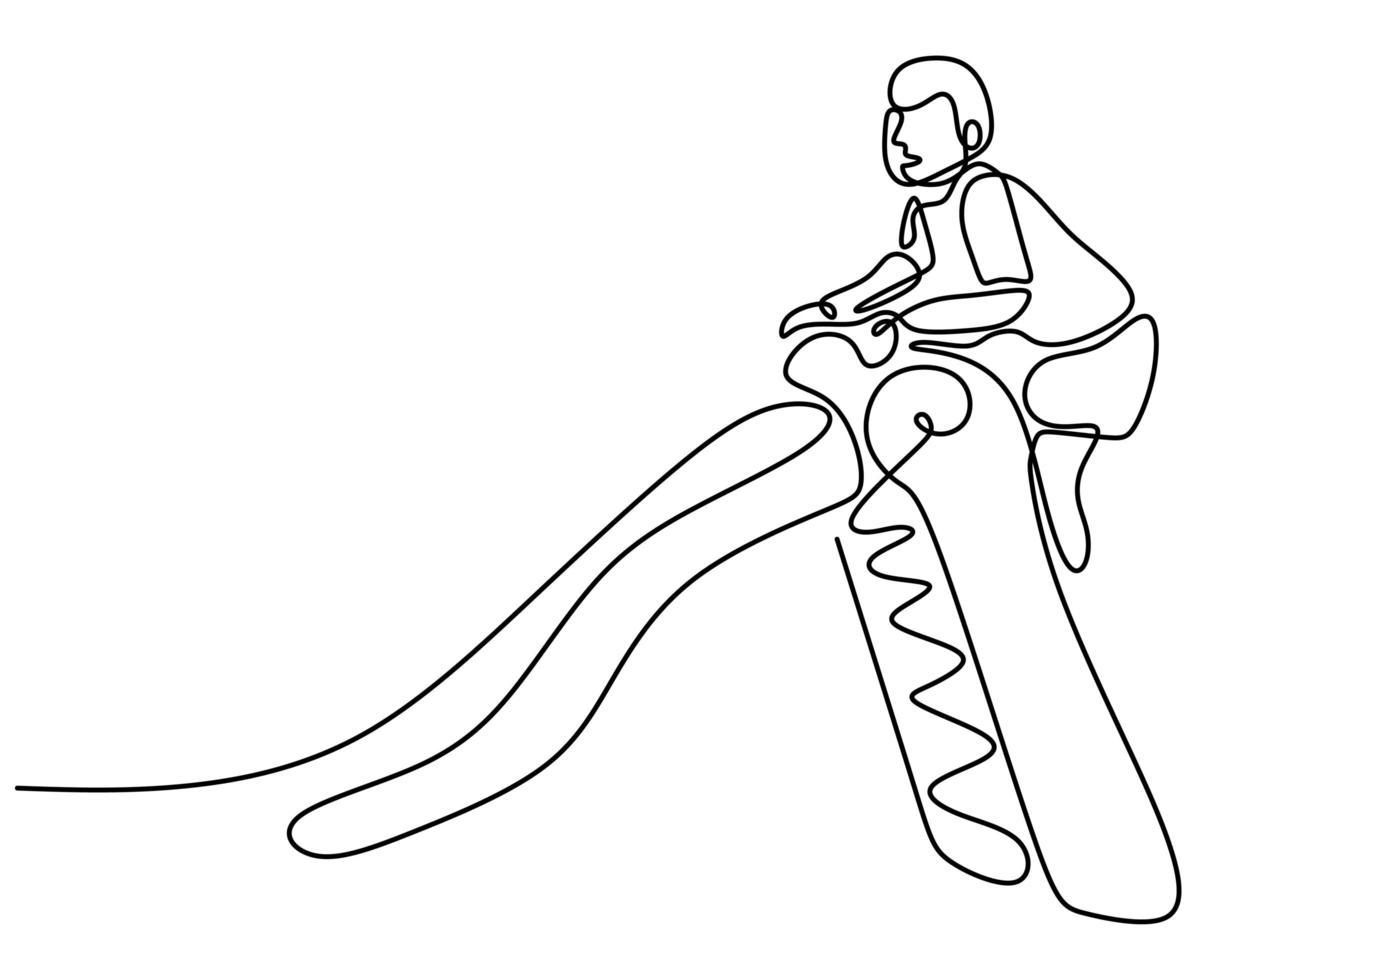 Continuous single drawn one line boy on a playground. vector